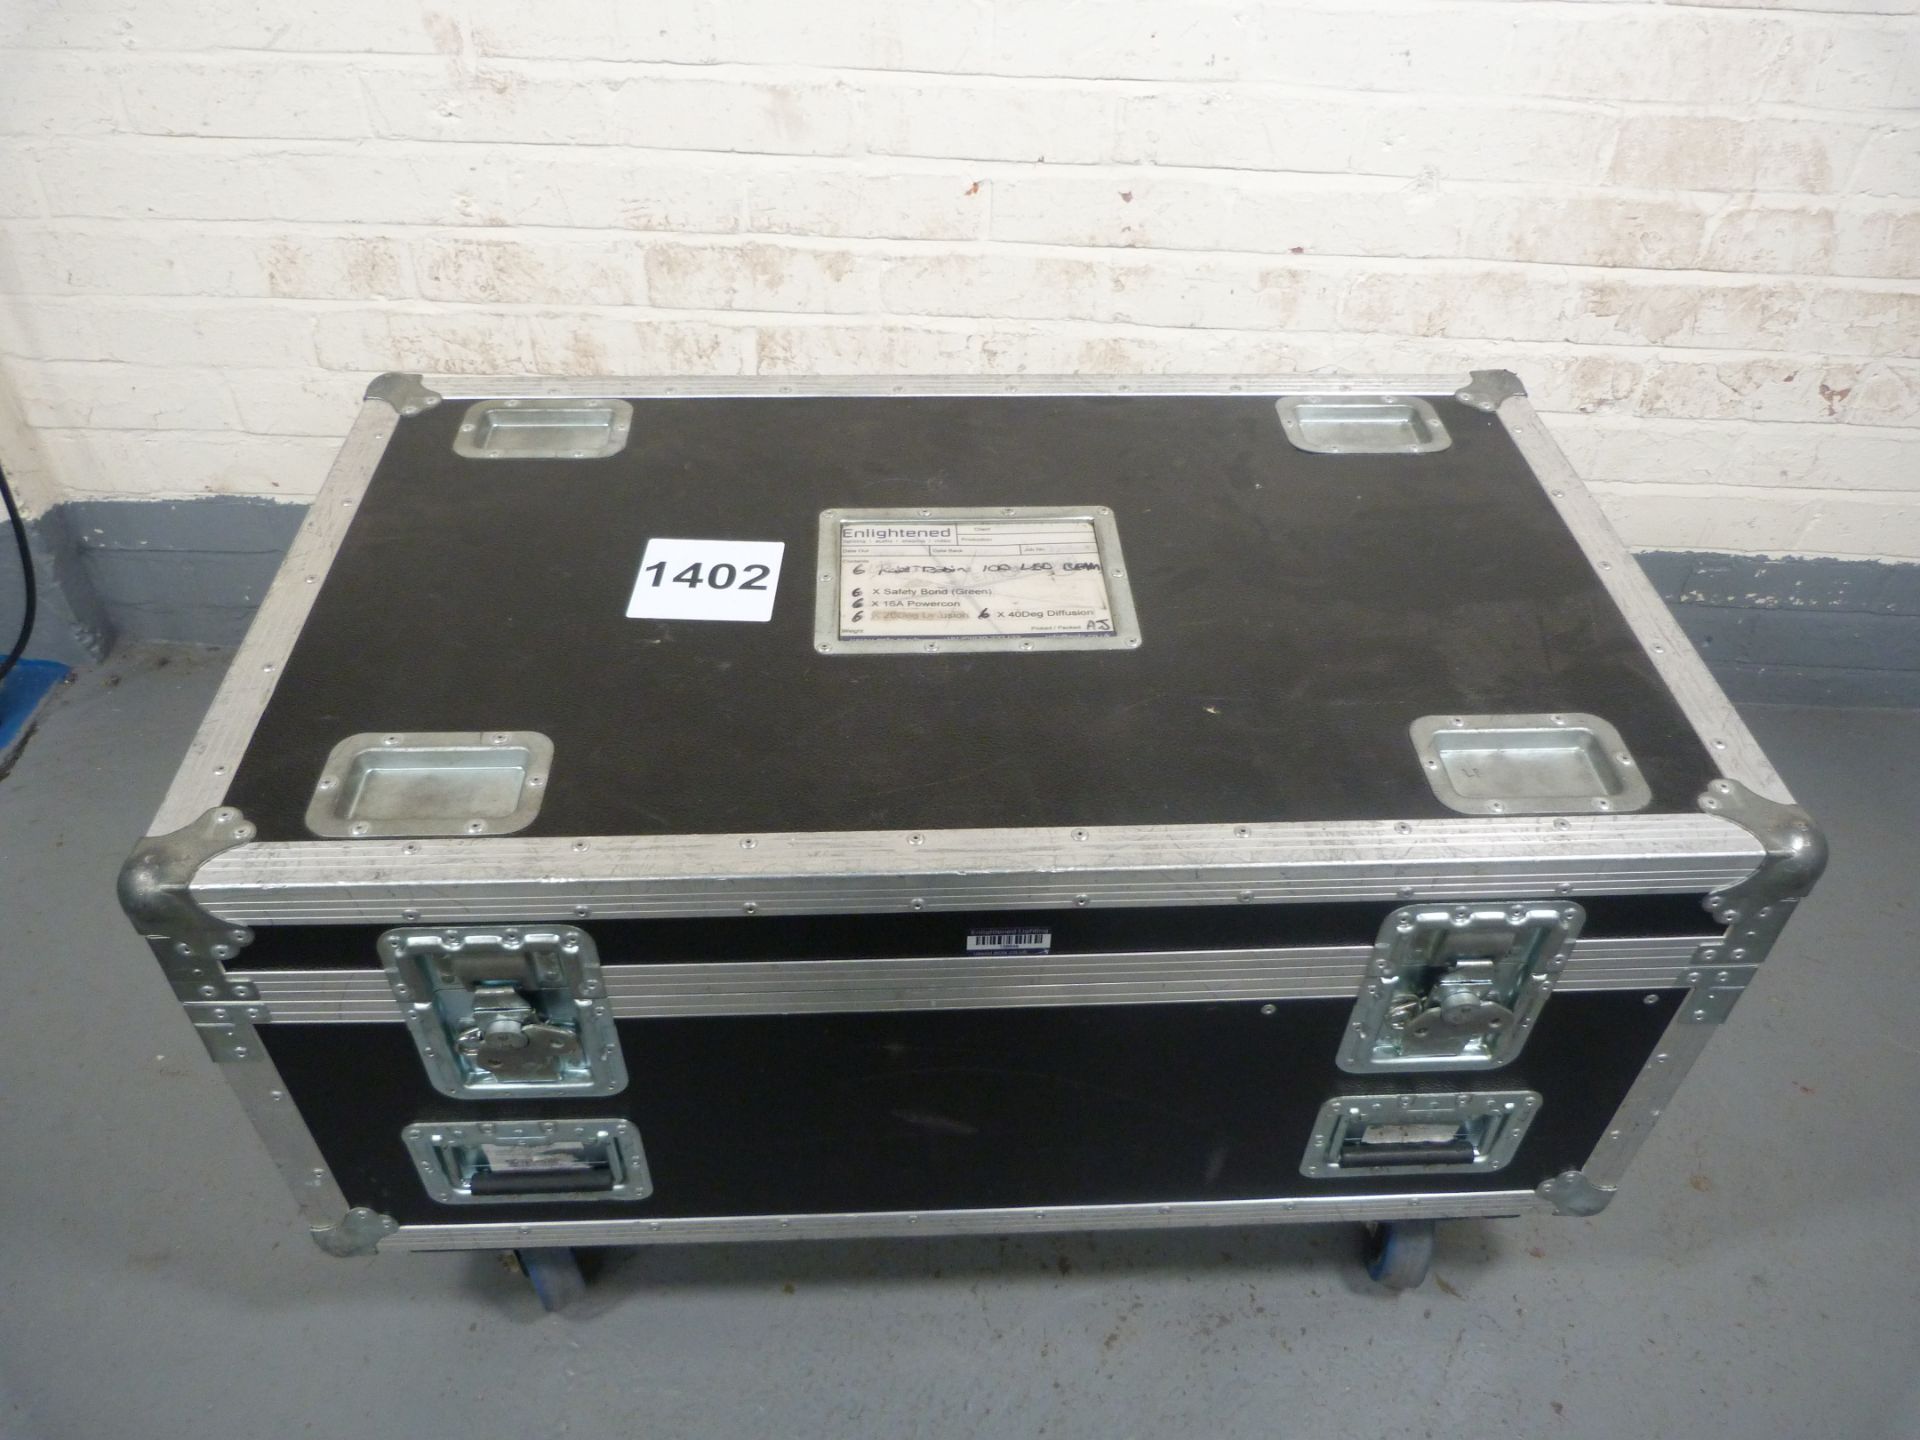 Robe Robin 100 LEDBeam - Case of Six Including Accessories. Ex-hire/Good Condition. Power On Time: - Image 7 of 17